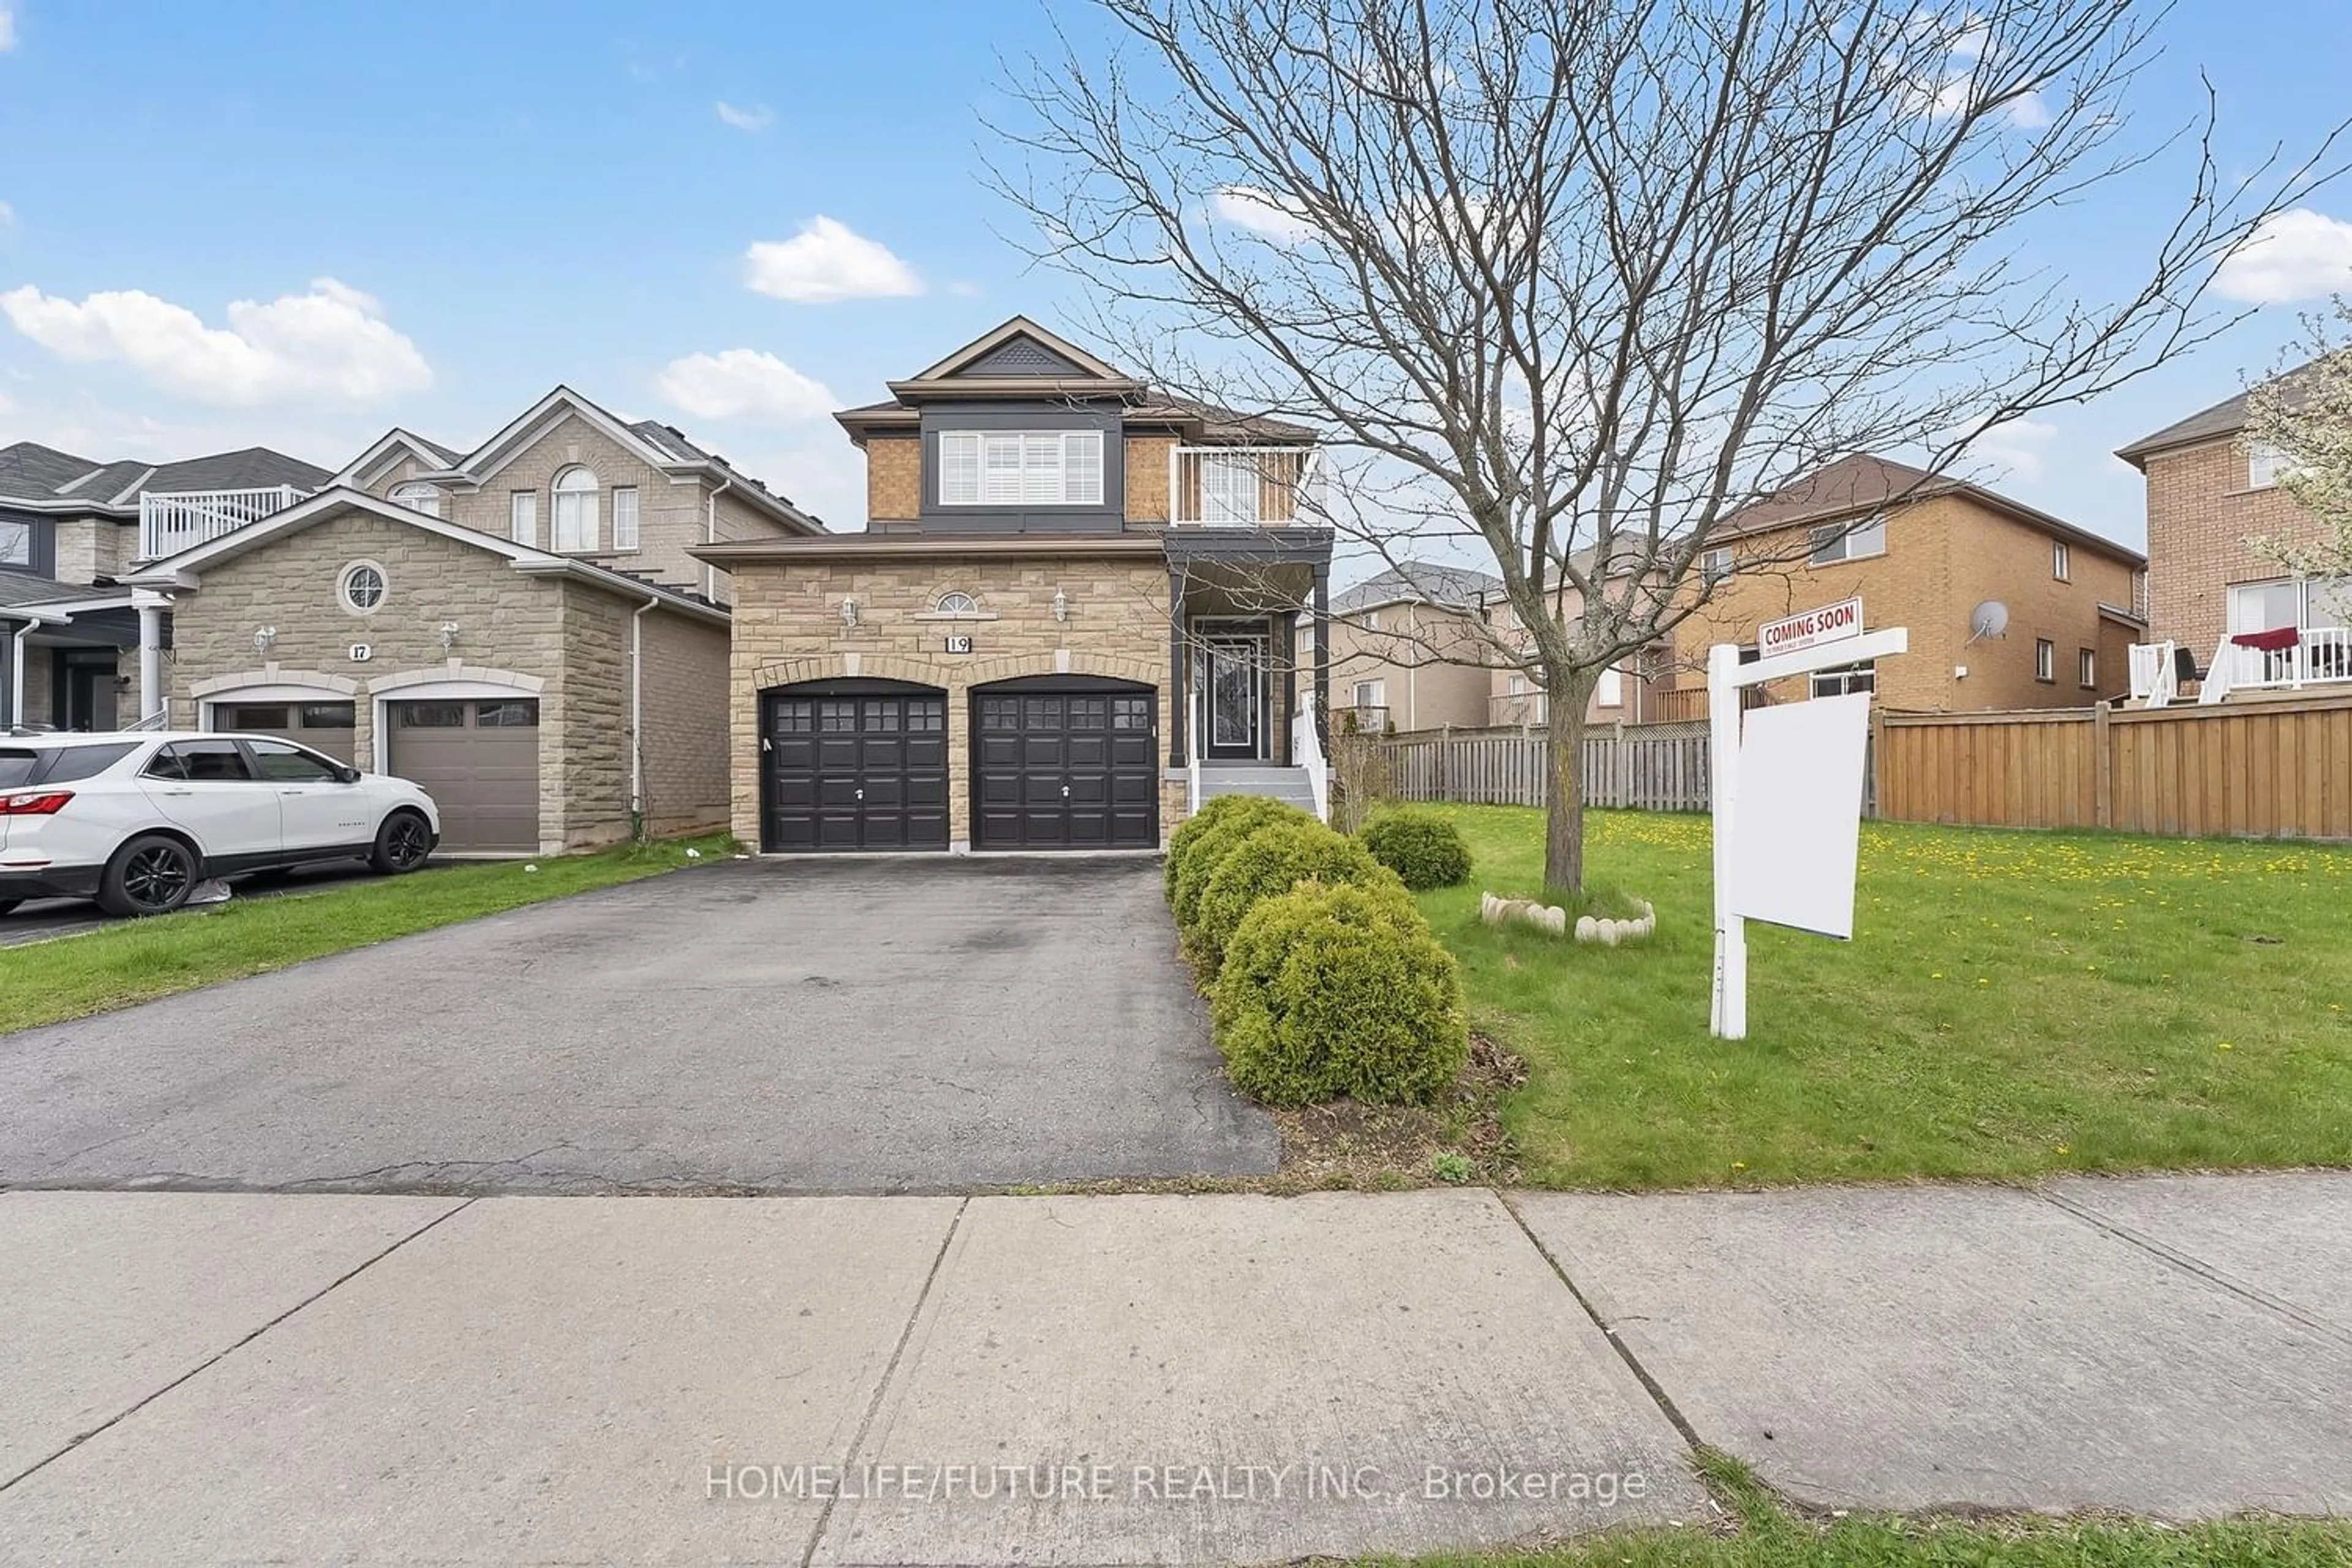 Frontside or backside of a home for 19 Albright Rd, Brampton Ontario L6X 5C8